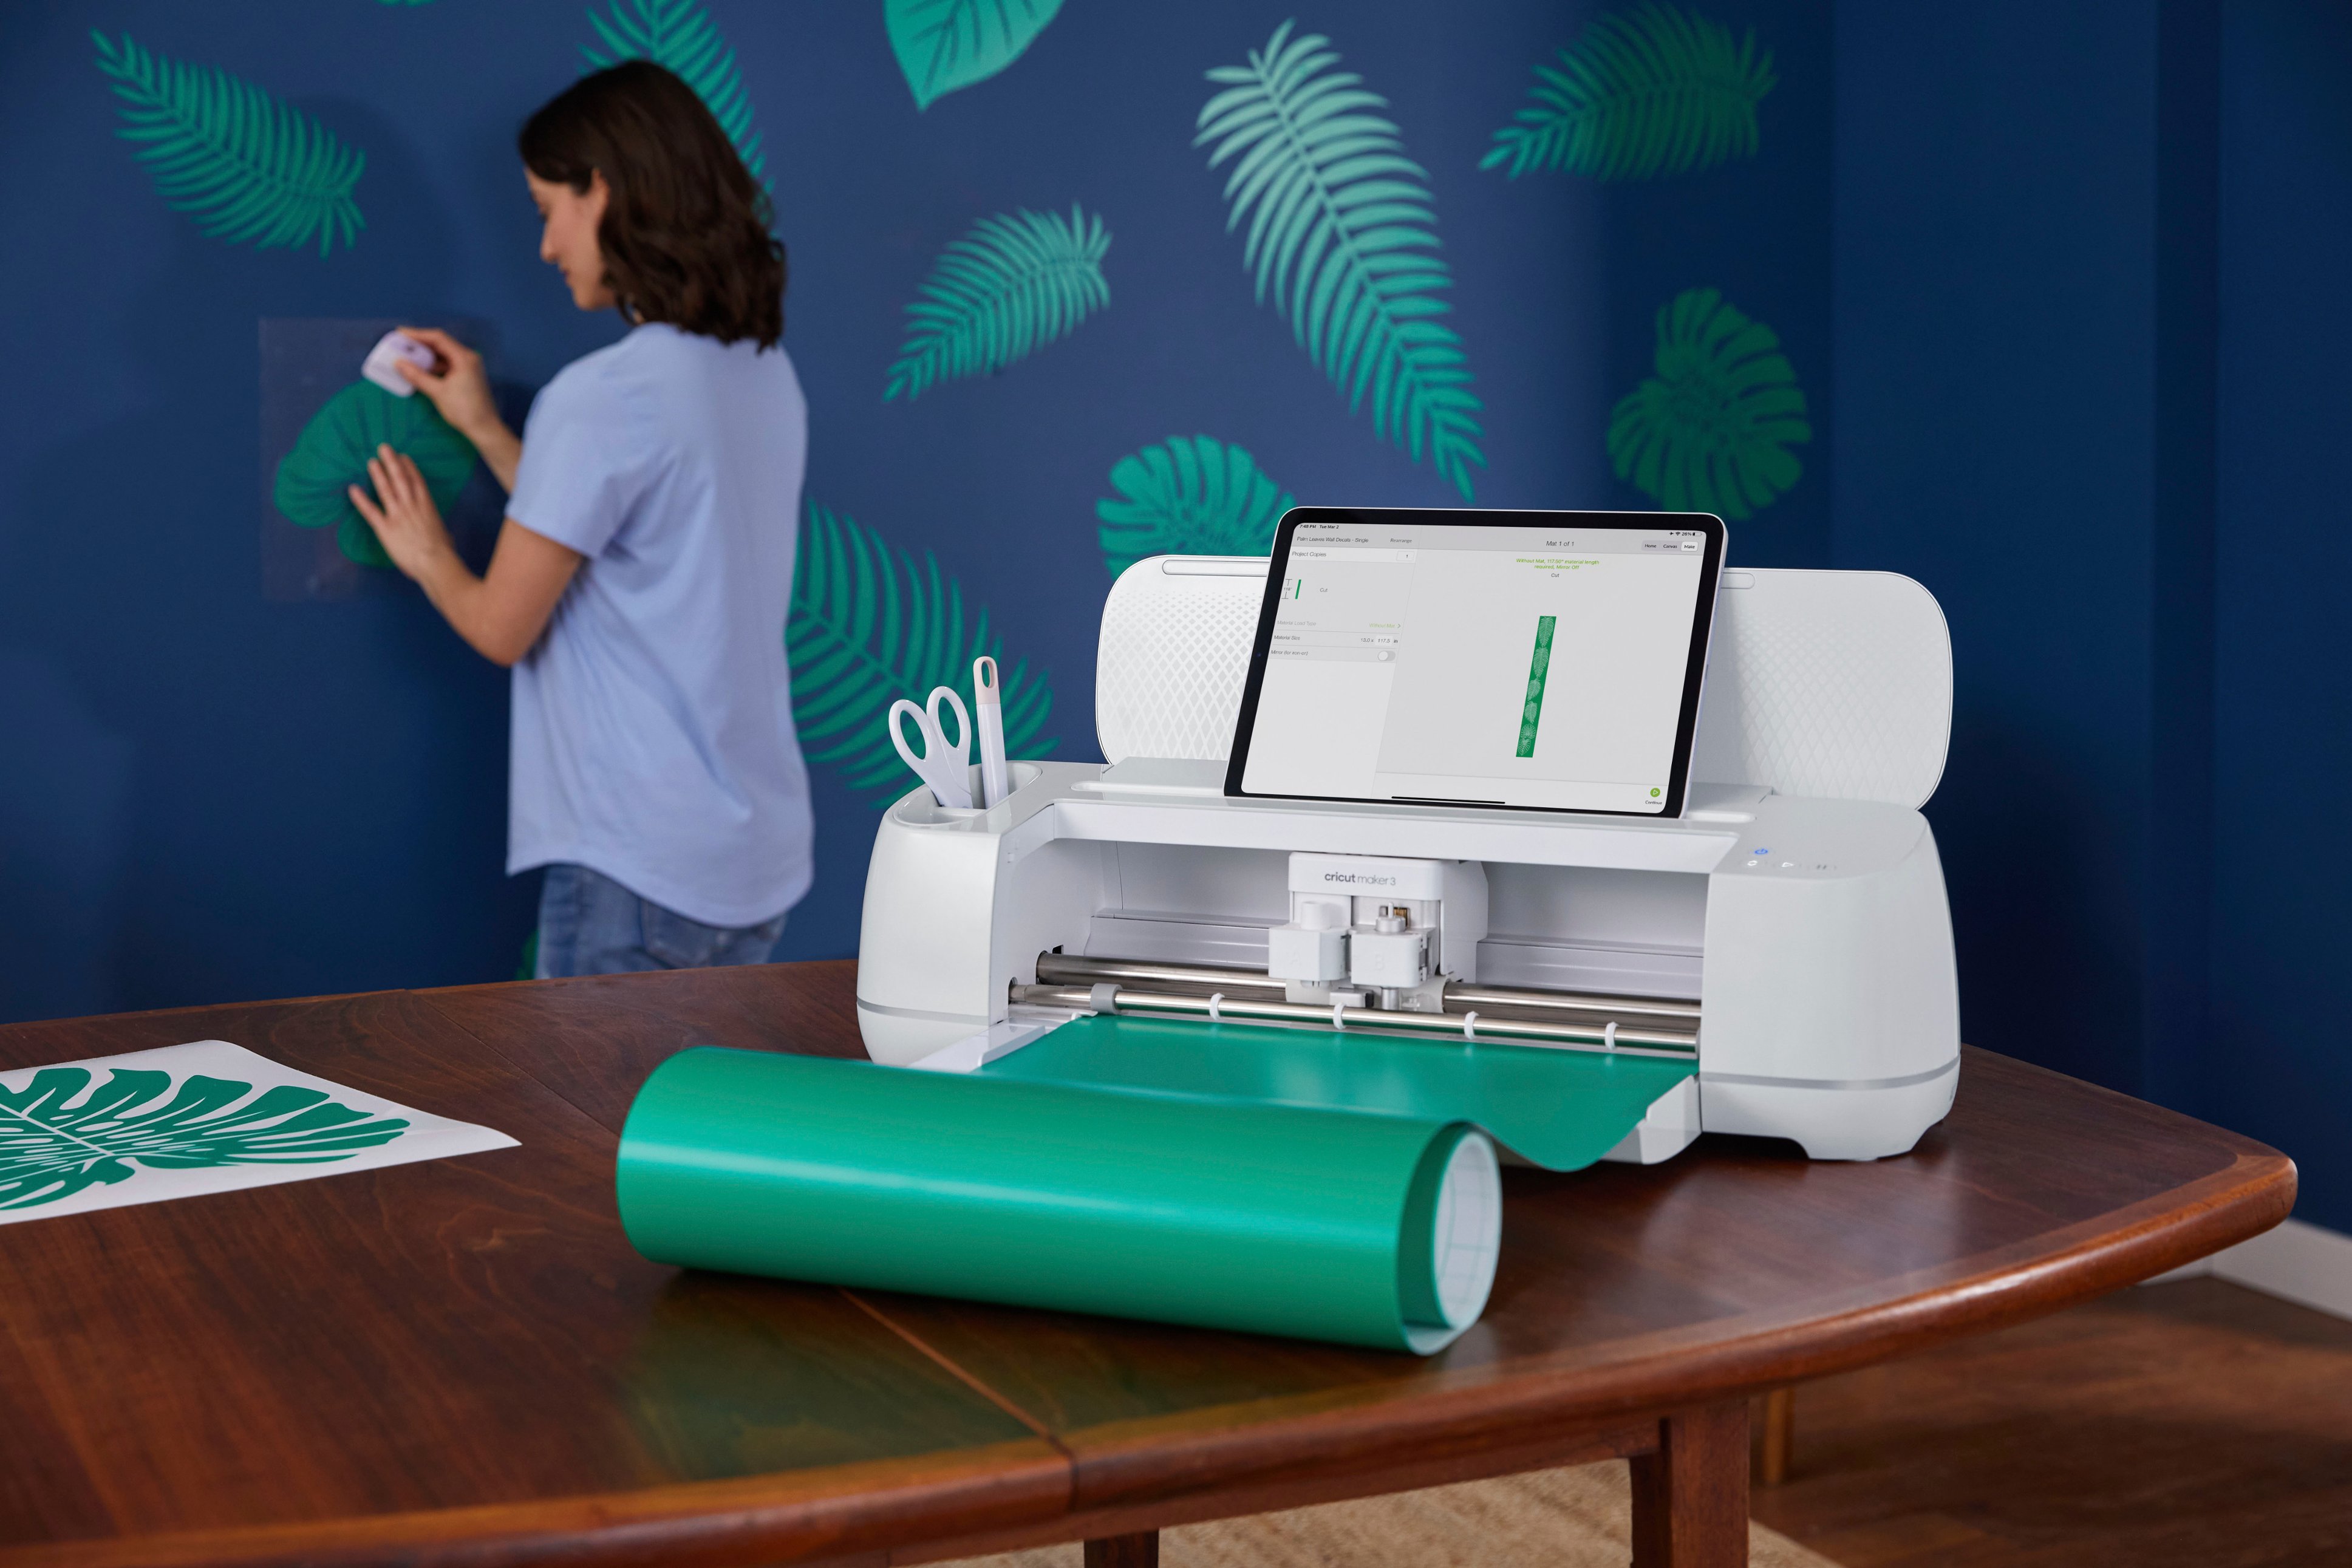 Cricut Maker SALE $299 for 3 Days Only - Mom MD Hawaii